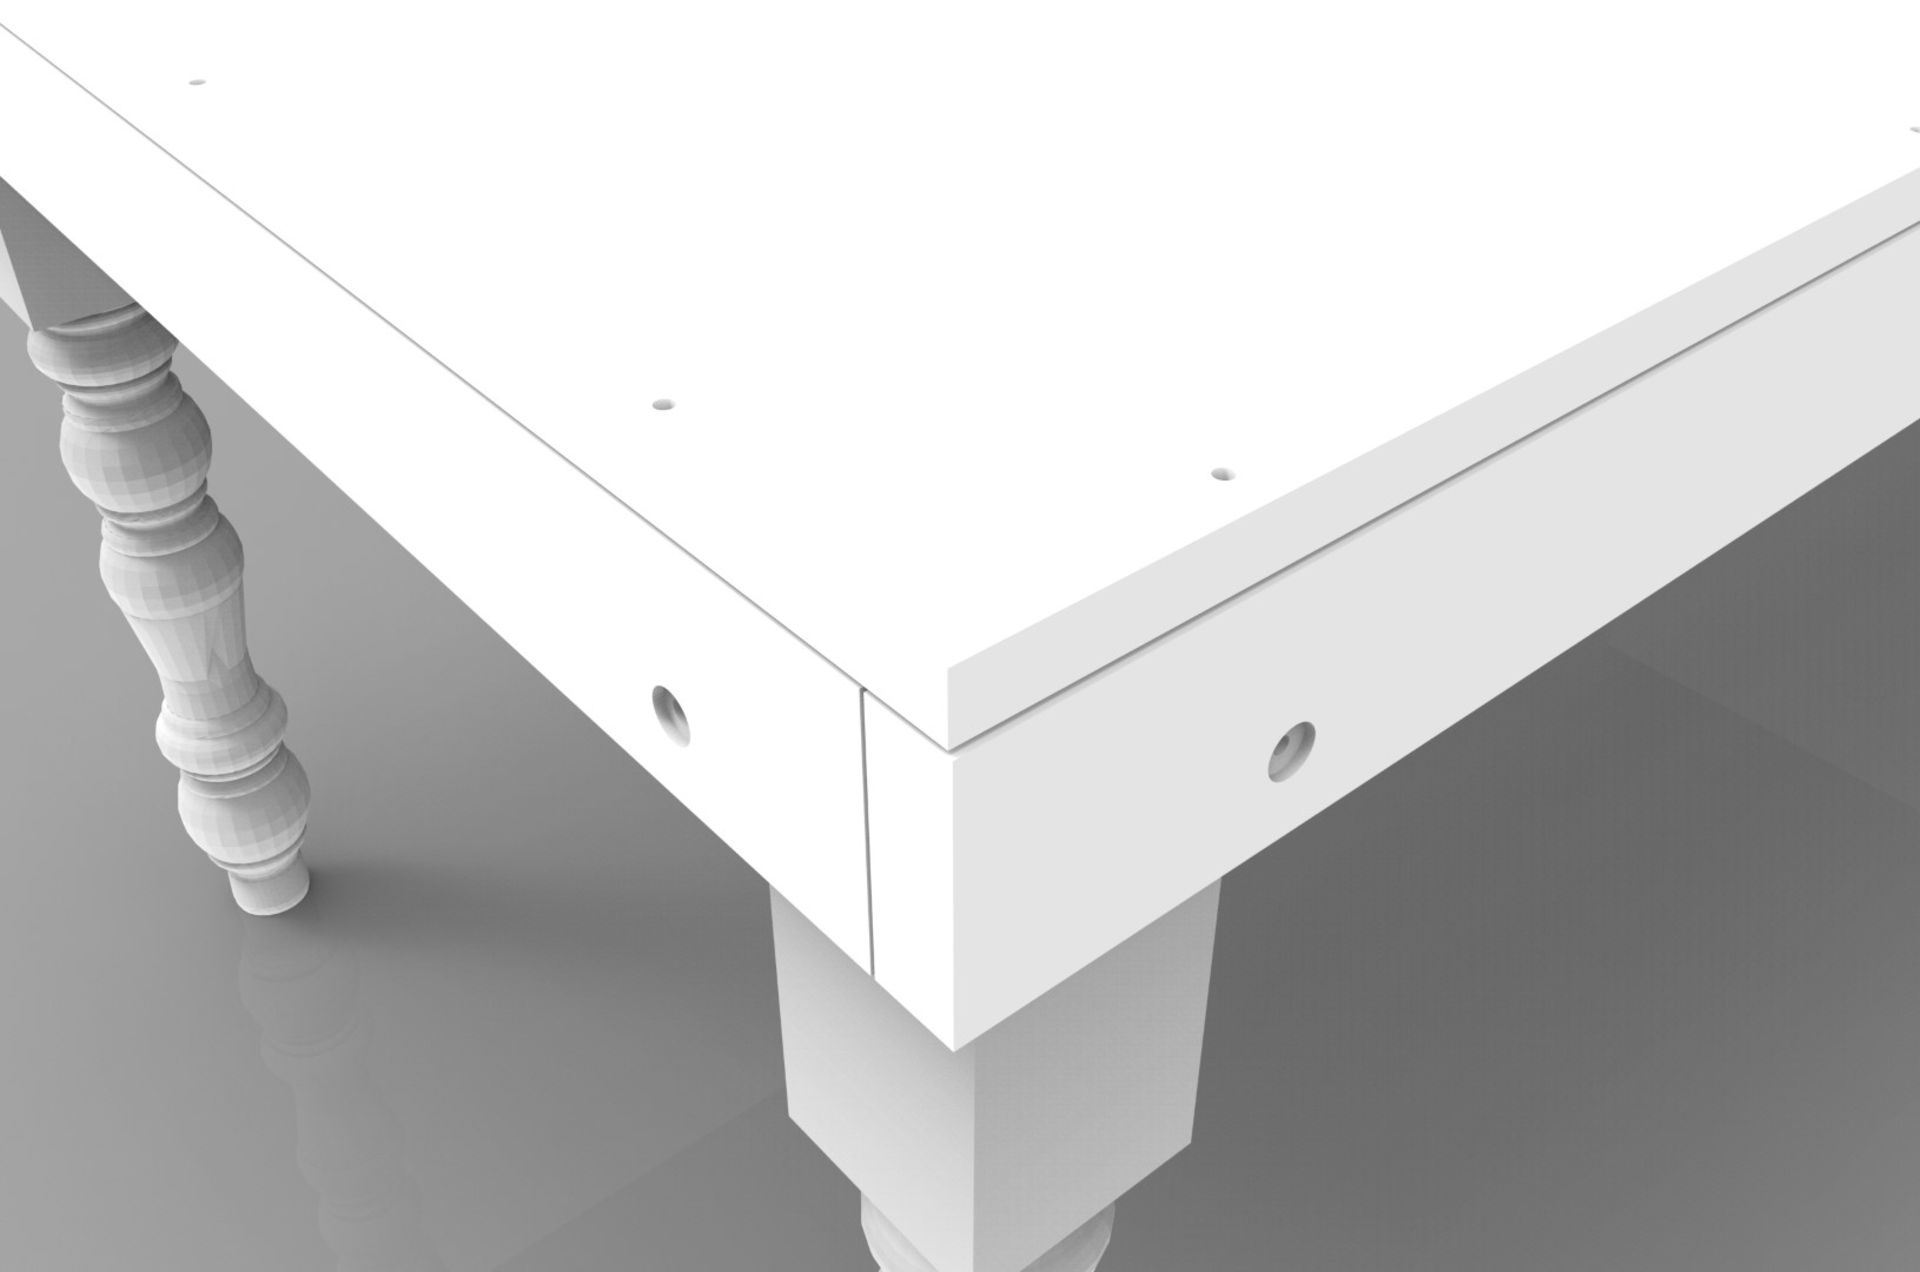 5 x Bespoke Rectangular Commercial Event / Dining Tables In White - Dimensions: 198cm x D99 x H74cm - Image 3 of 5